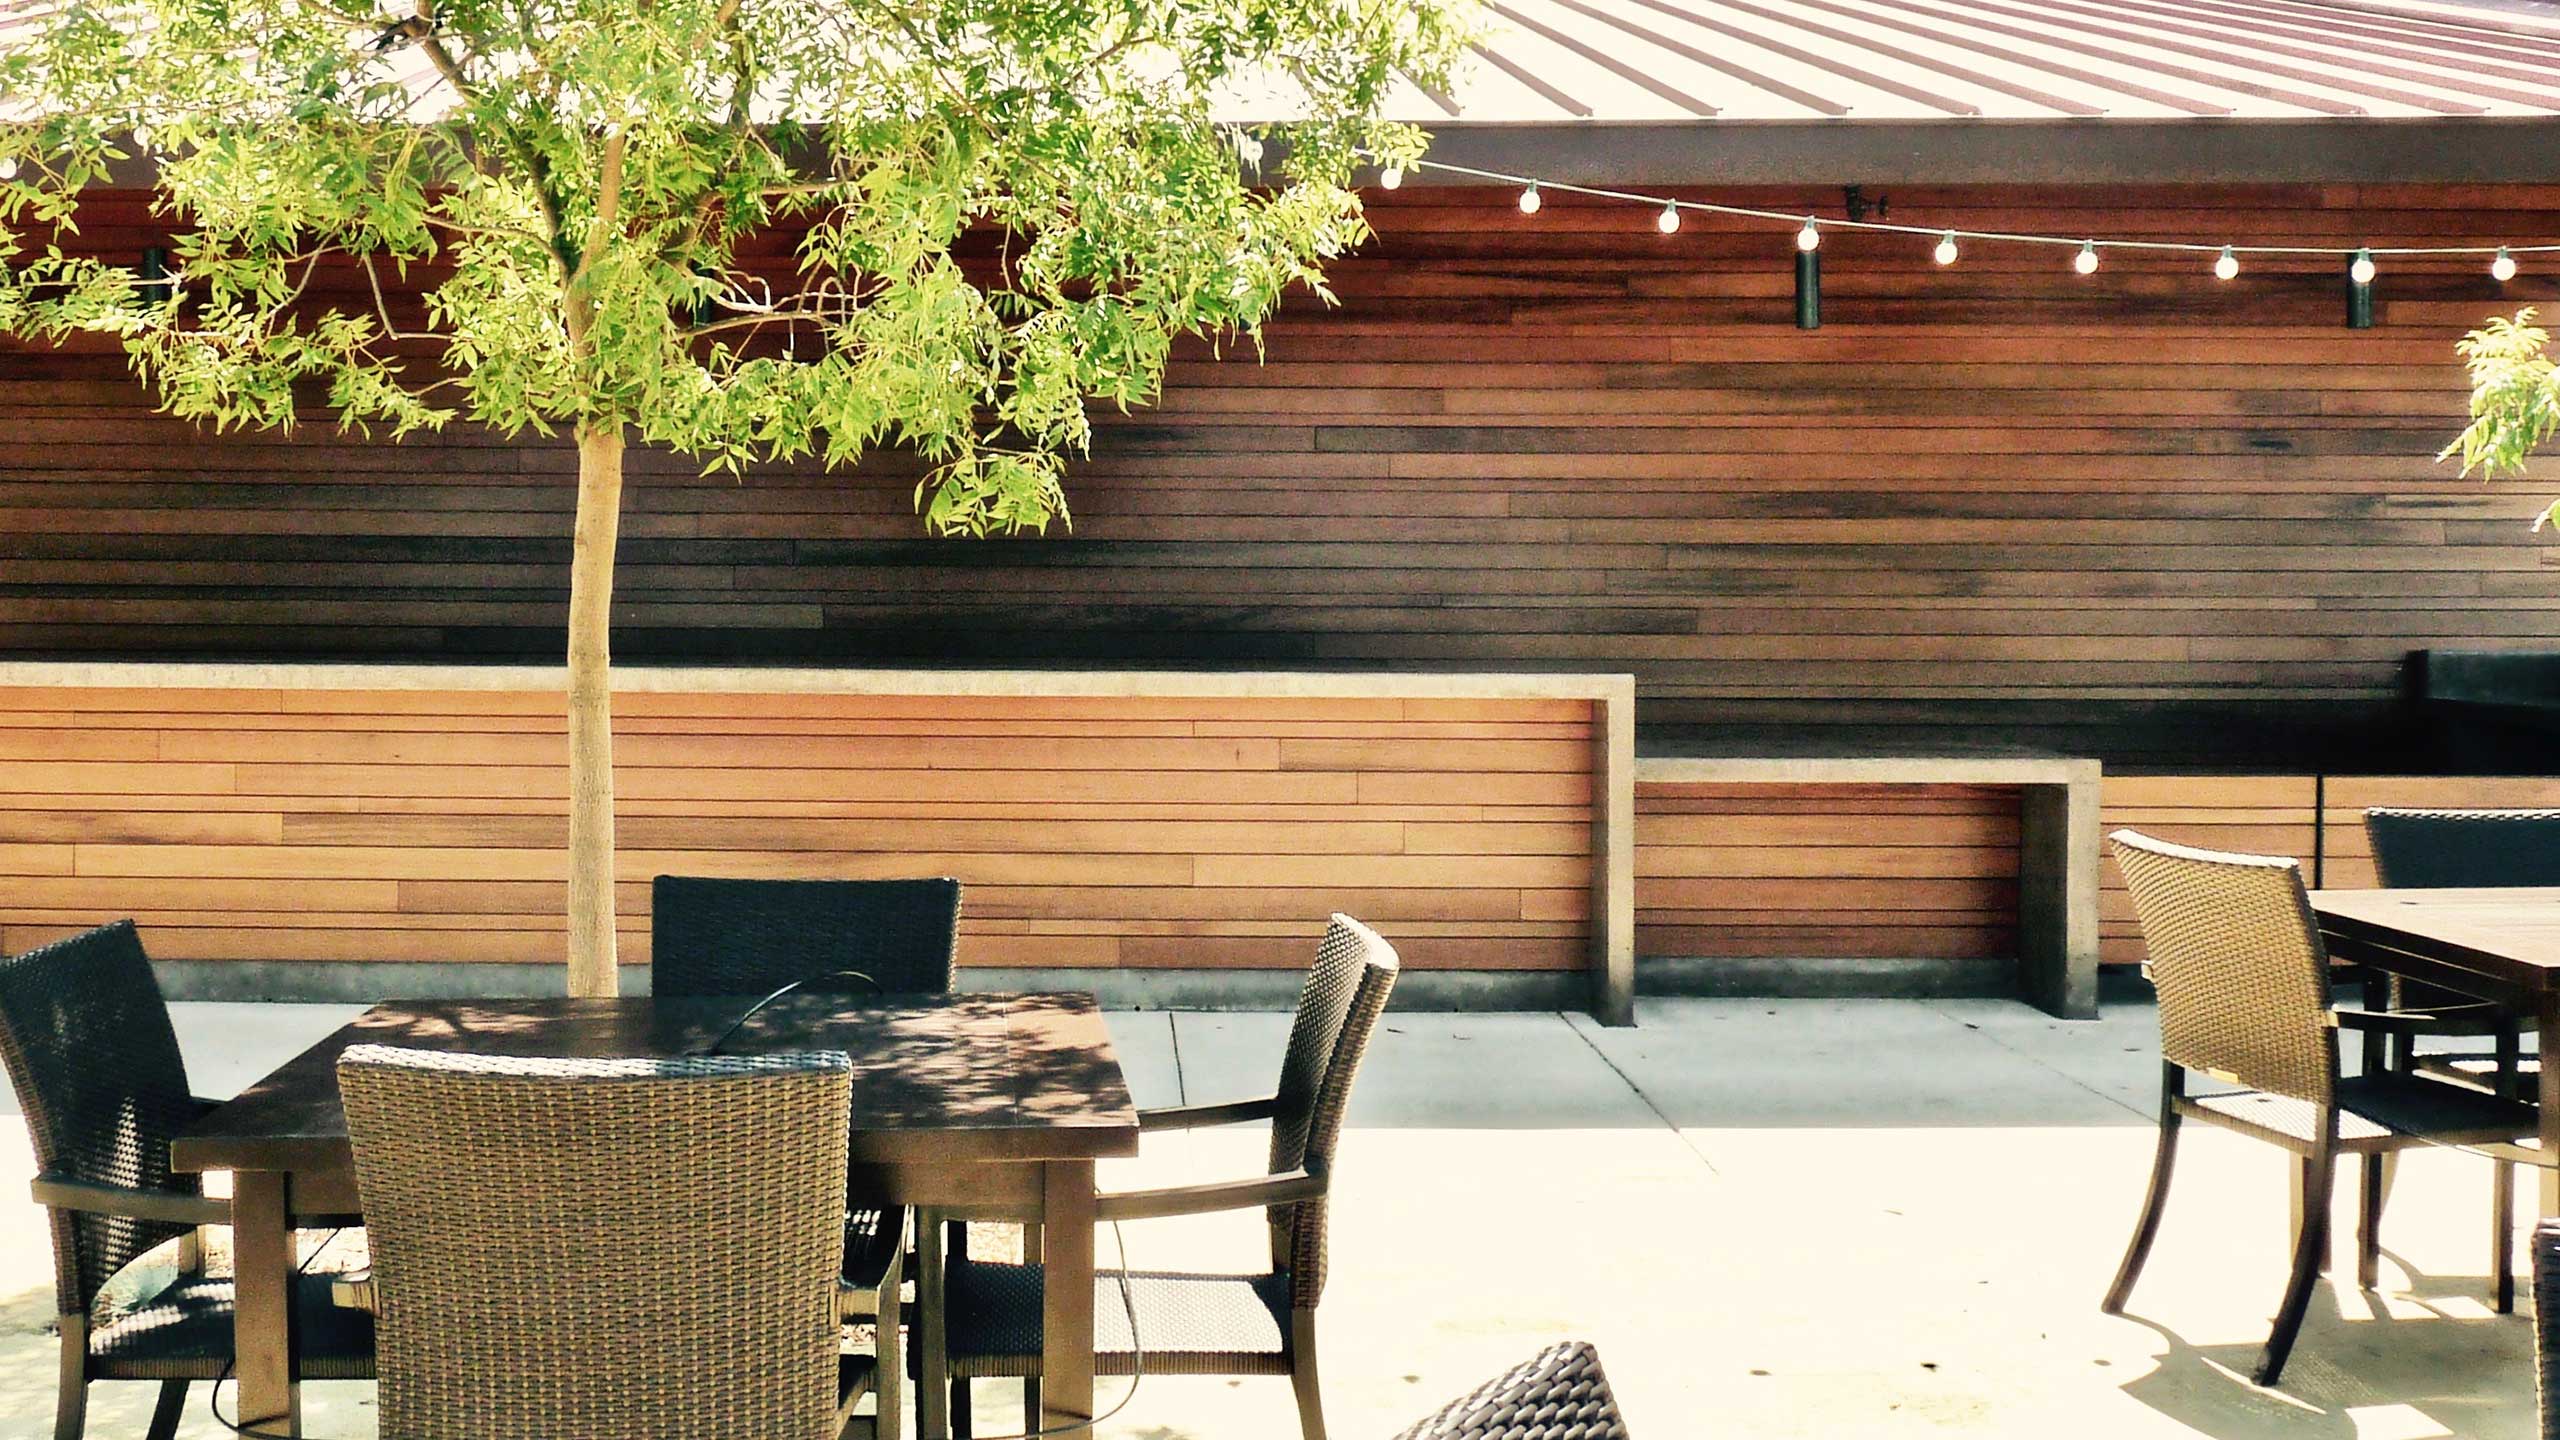 Winery-Architecture-Healdsburg-outdoor-seating-reclaimed-wood